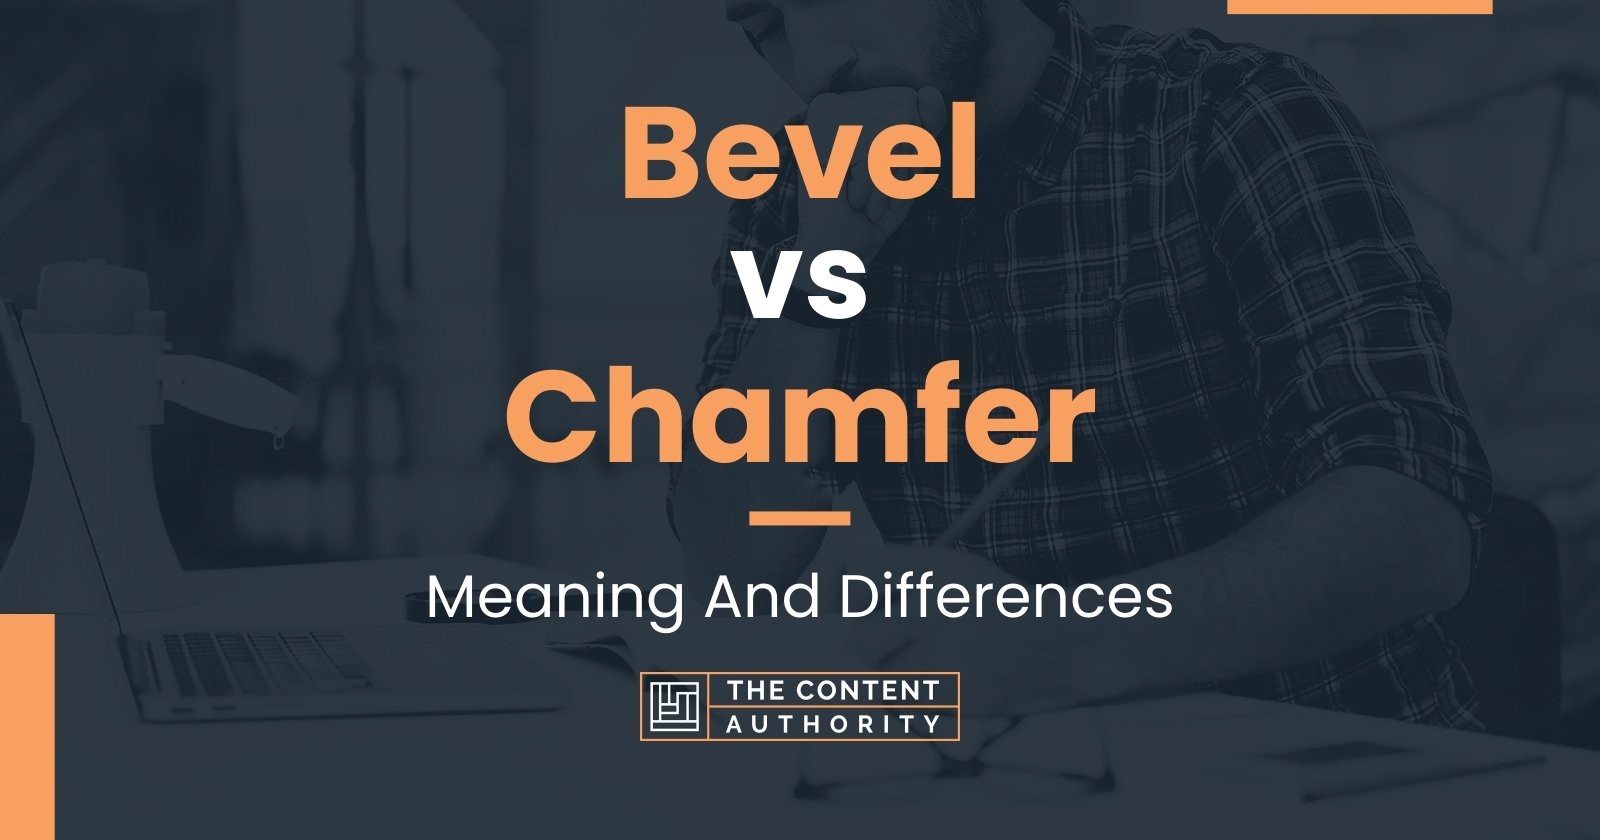 Bevel vs Chamfer: Meaning And Differences